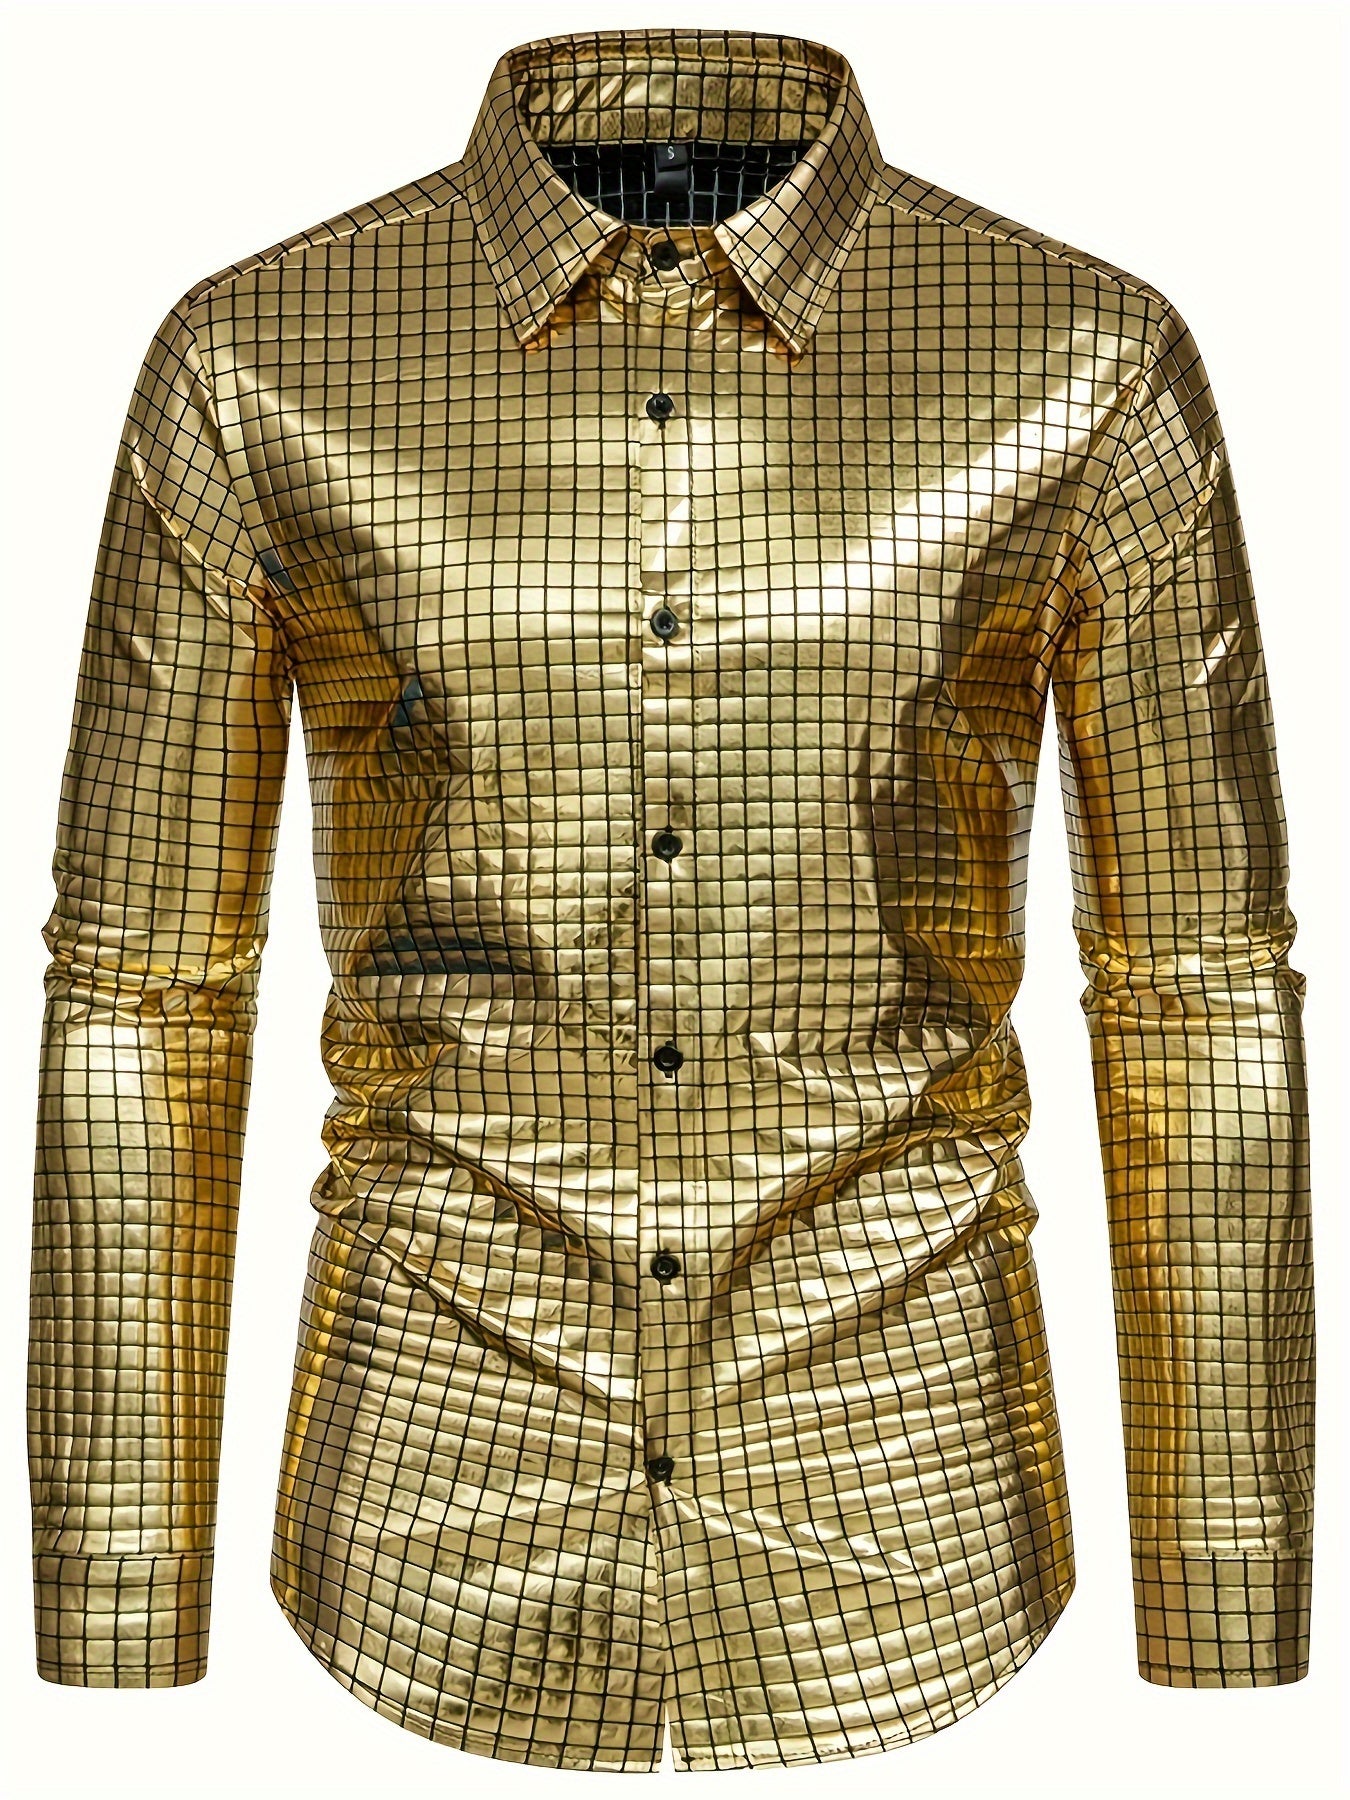 "Men's Sequin Checkered Party Shirt - Long Sleeve Button Up, Spring/Fall Fashion"